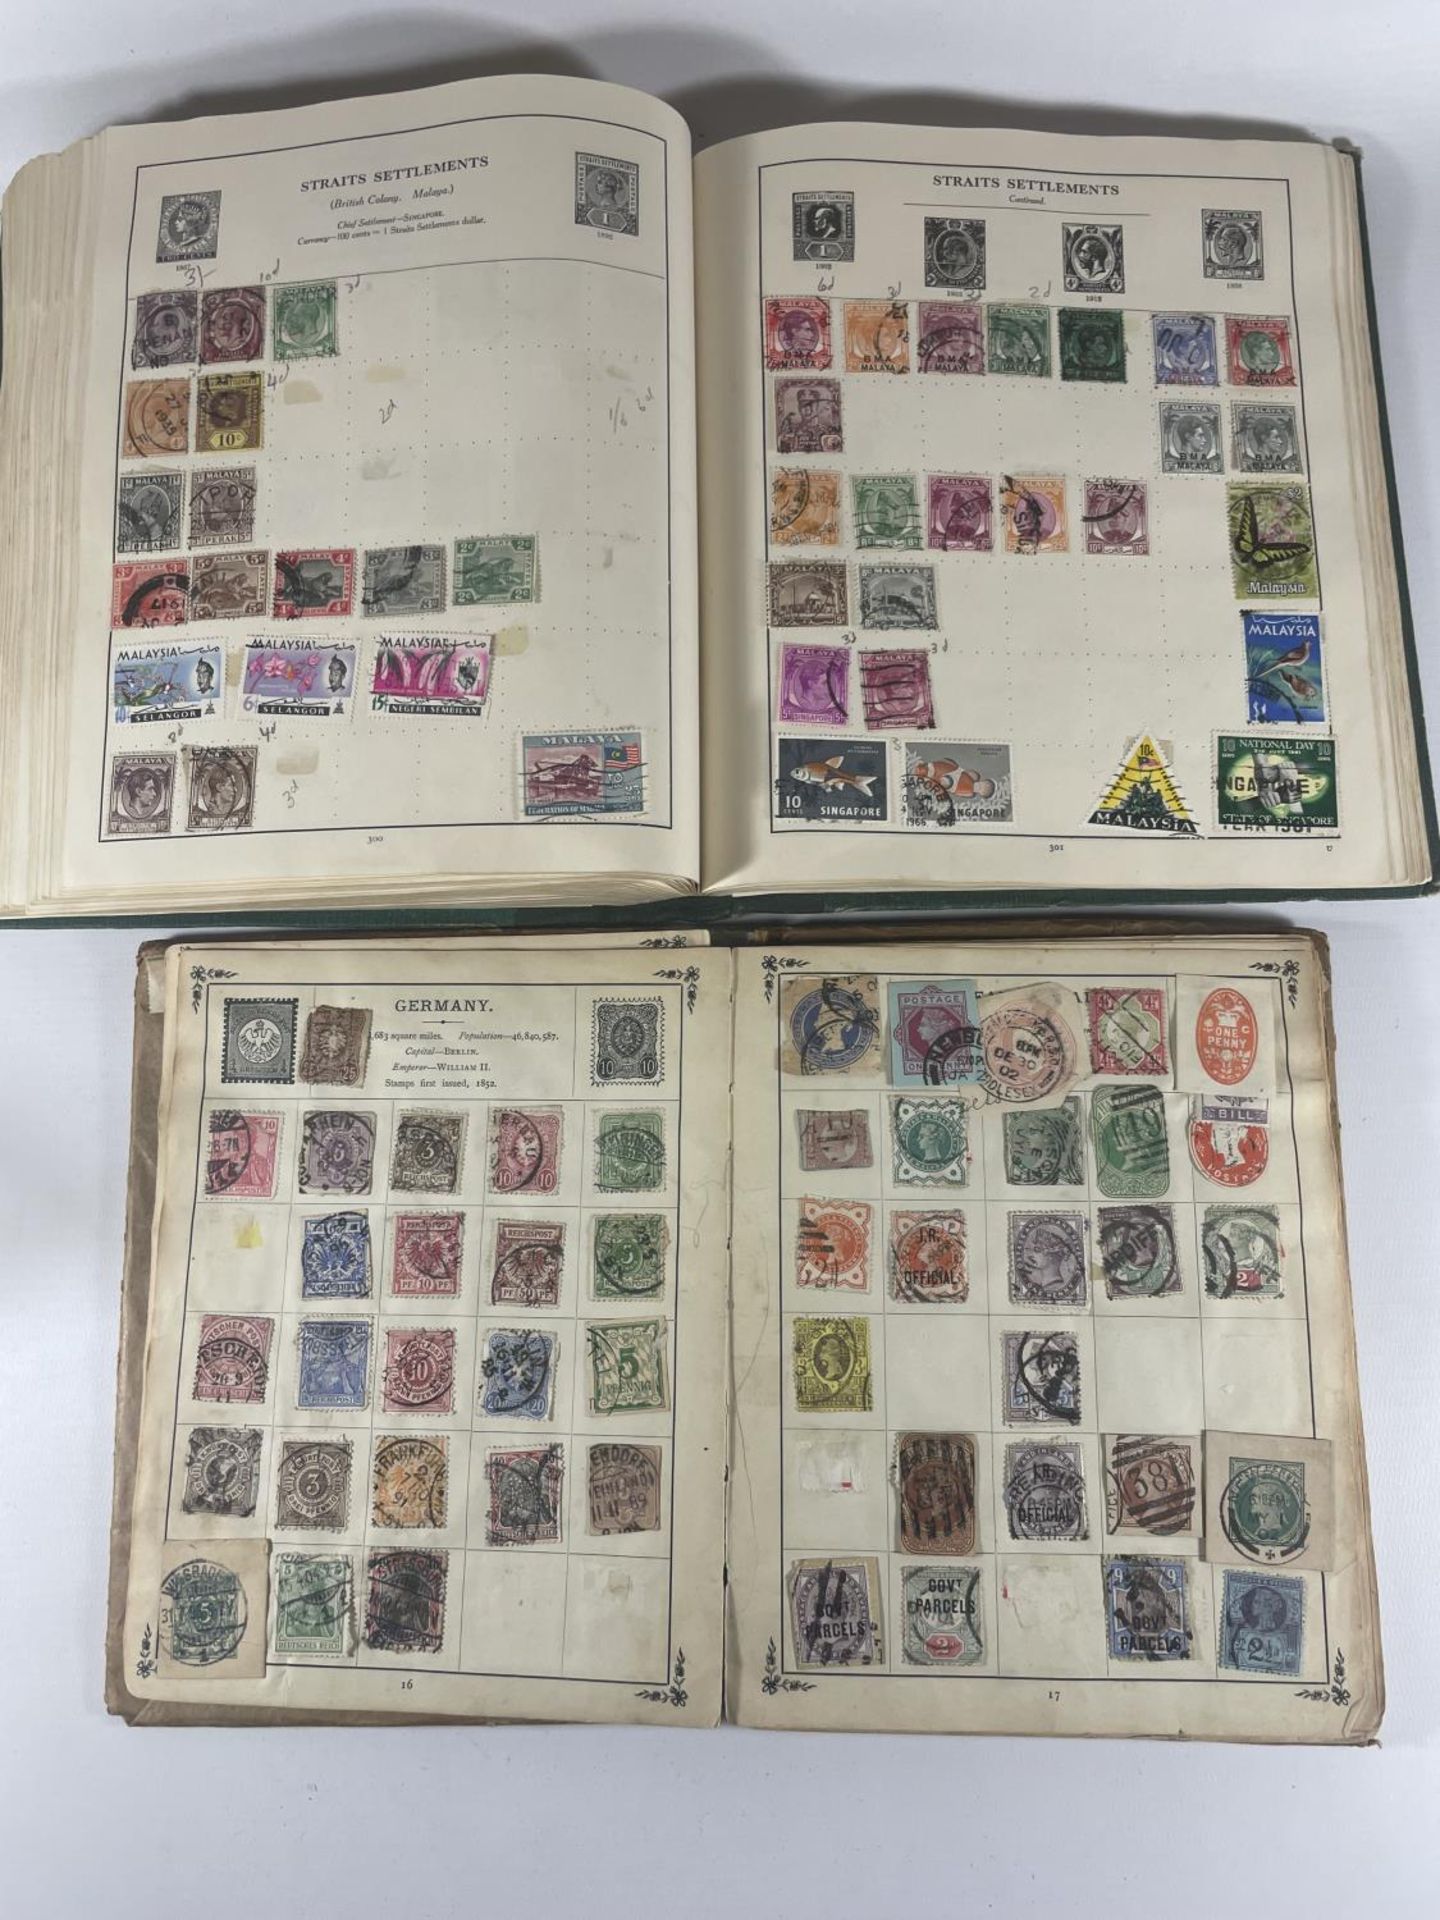 TWO VINTAGE STAMP ALBUMS INCLUDING THE WELL FILLED VICEROY AND THE ROYAL . MANY USEFUL ITEMS NOTED - Image 3 of 4